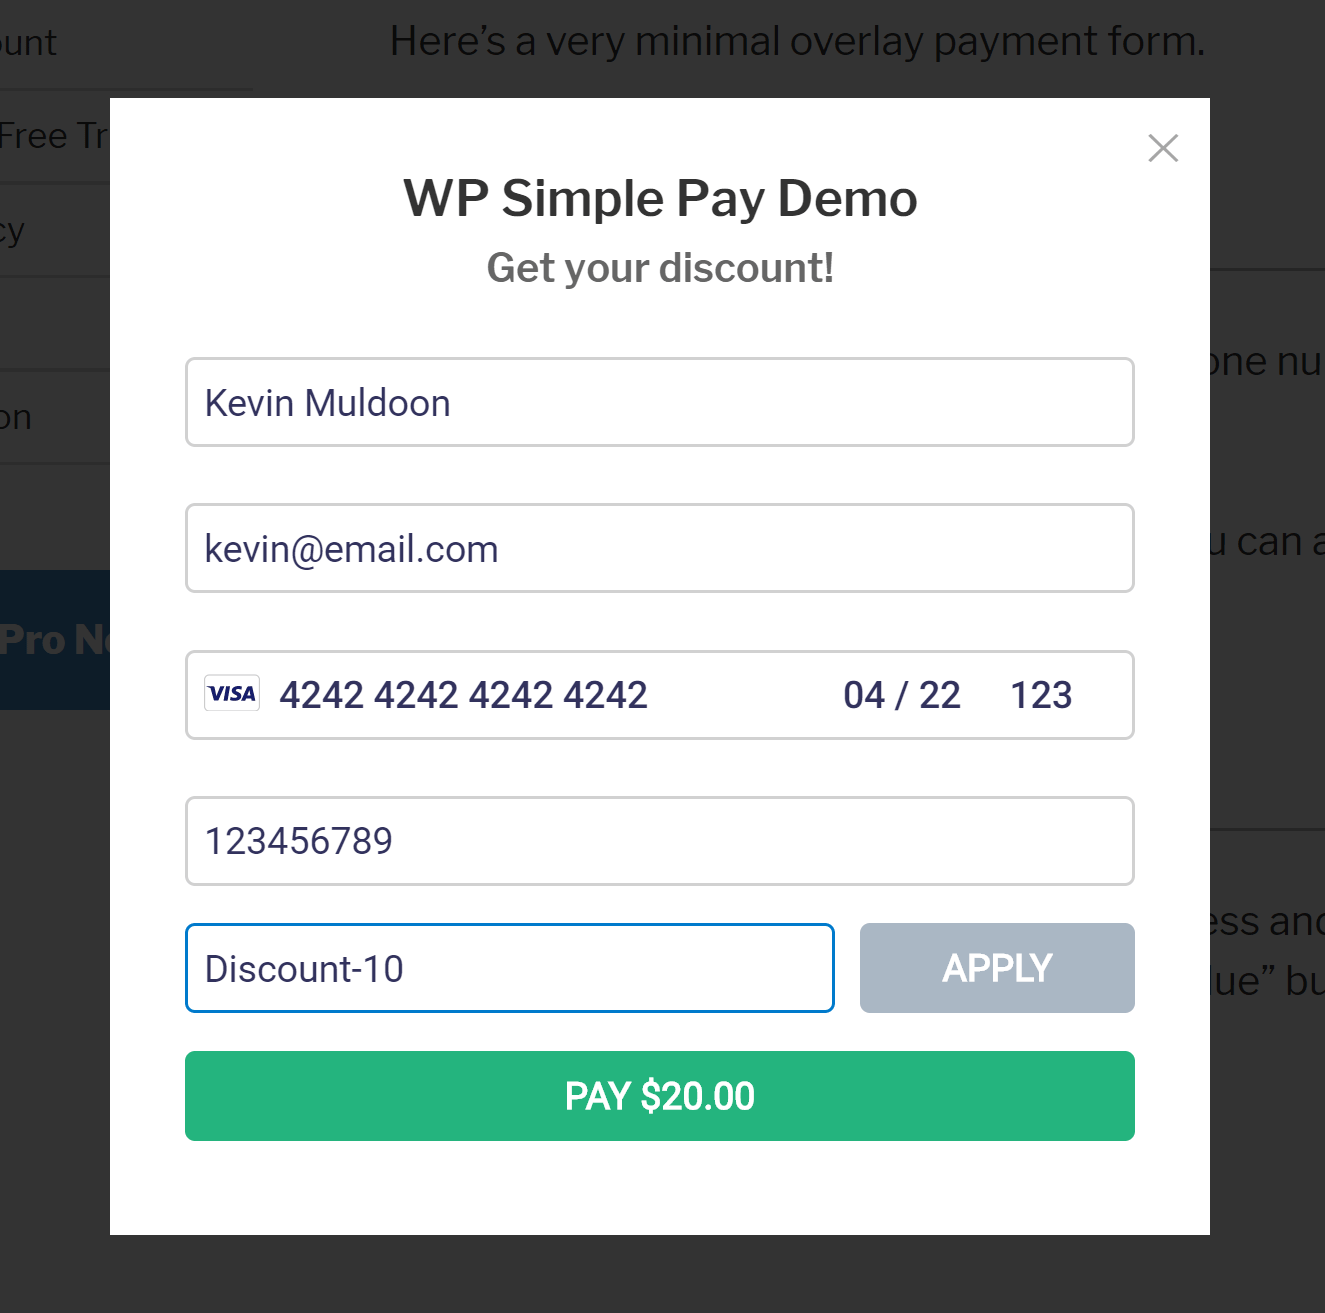 WP Simple Pay Overlay Form